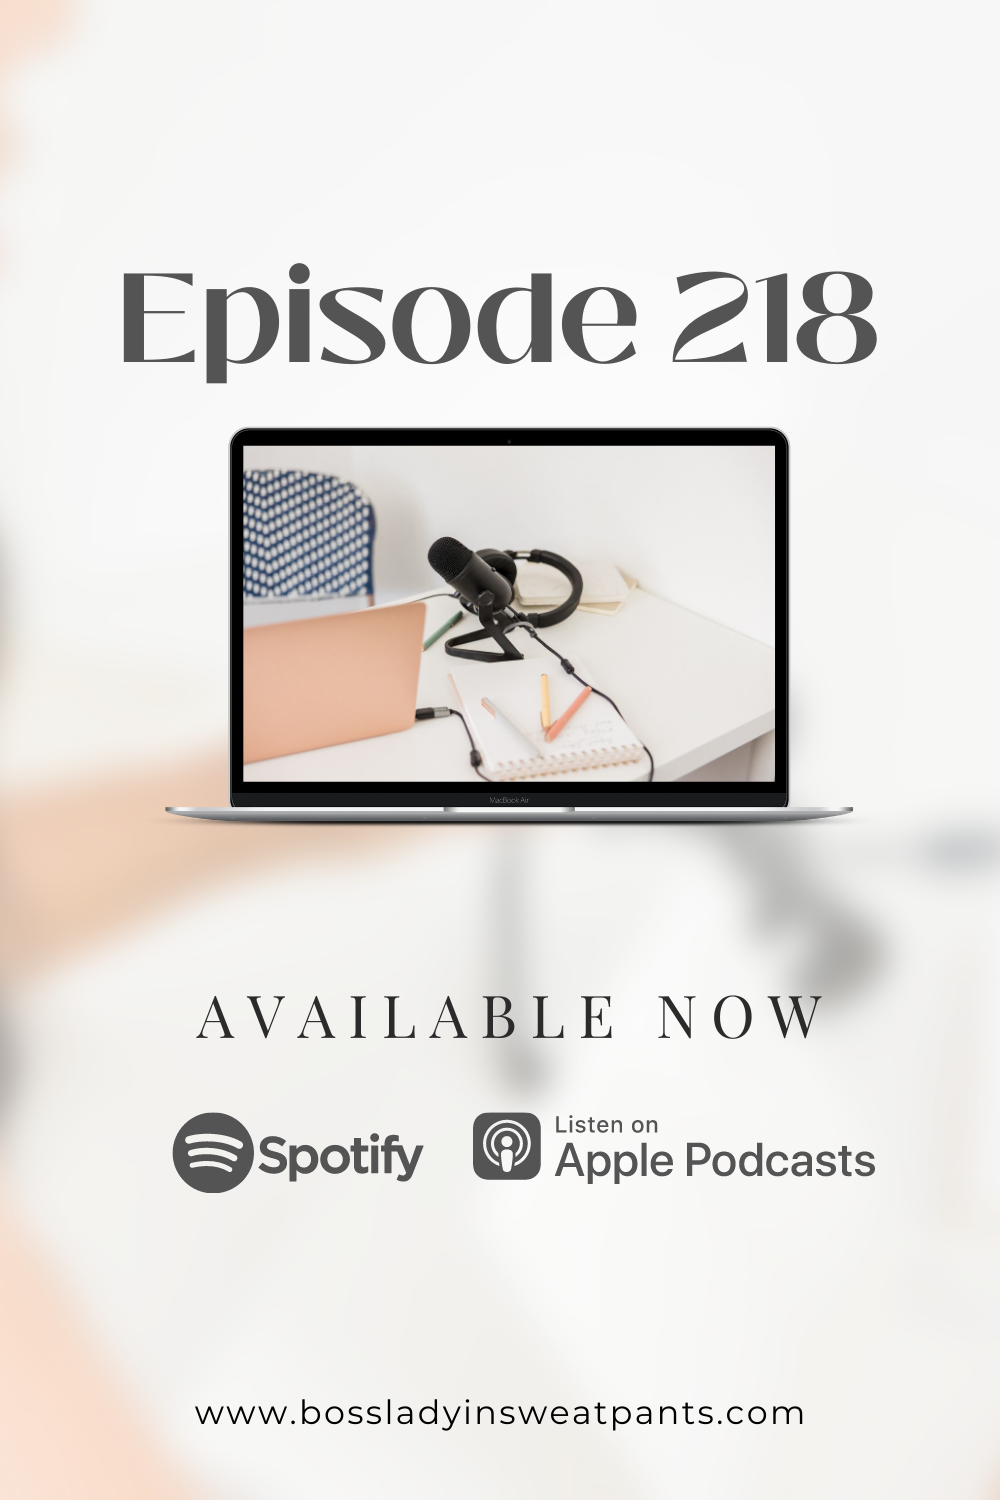 computer mockup graphic with a photo of a microphone, text: episode 218 available now on Spotify and Apple Podcasts